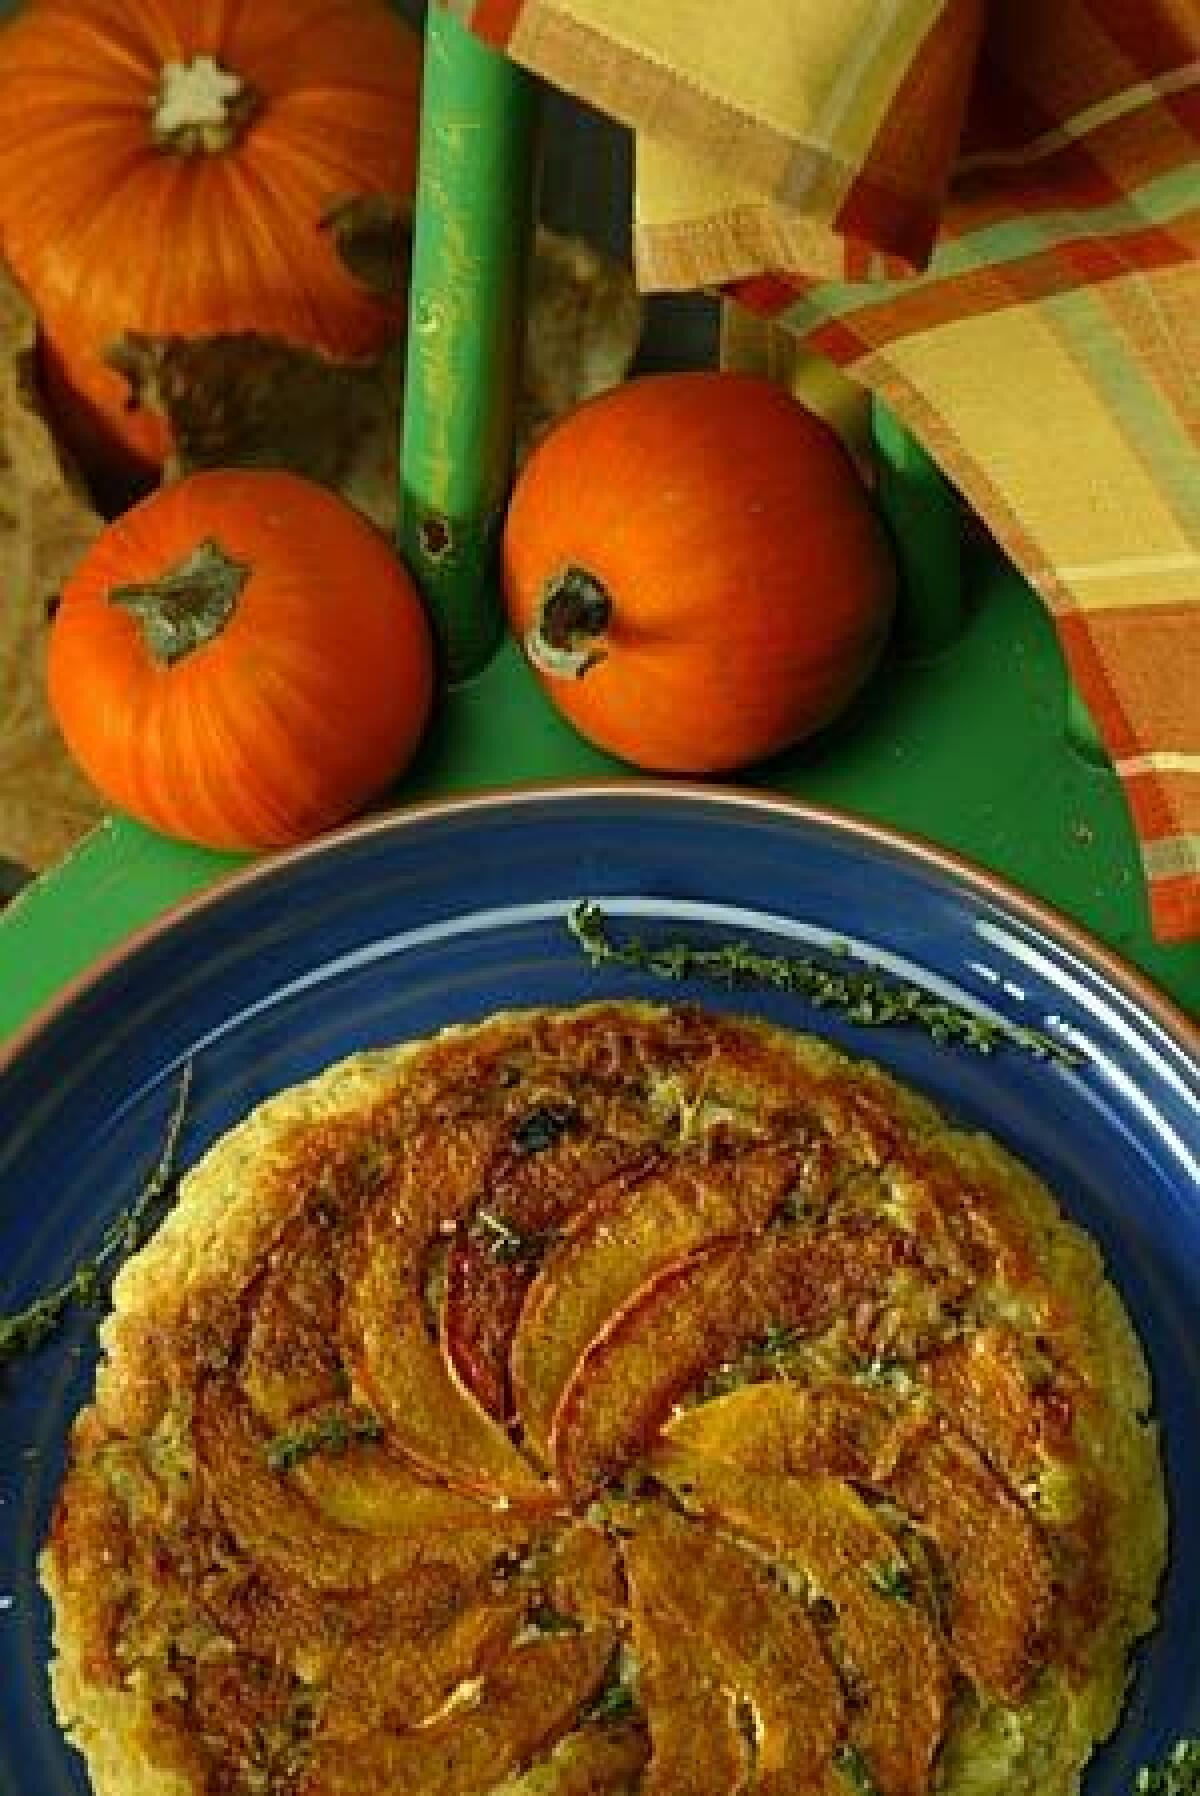 Pumpkin tarte Tatin, with goat cheese, onions and thyme, has displaced the quiche in many European restaurants as a vegetarian course. Puff pastry can substitute for the pie crust.